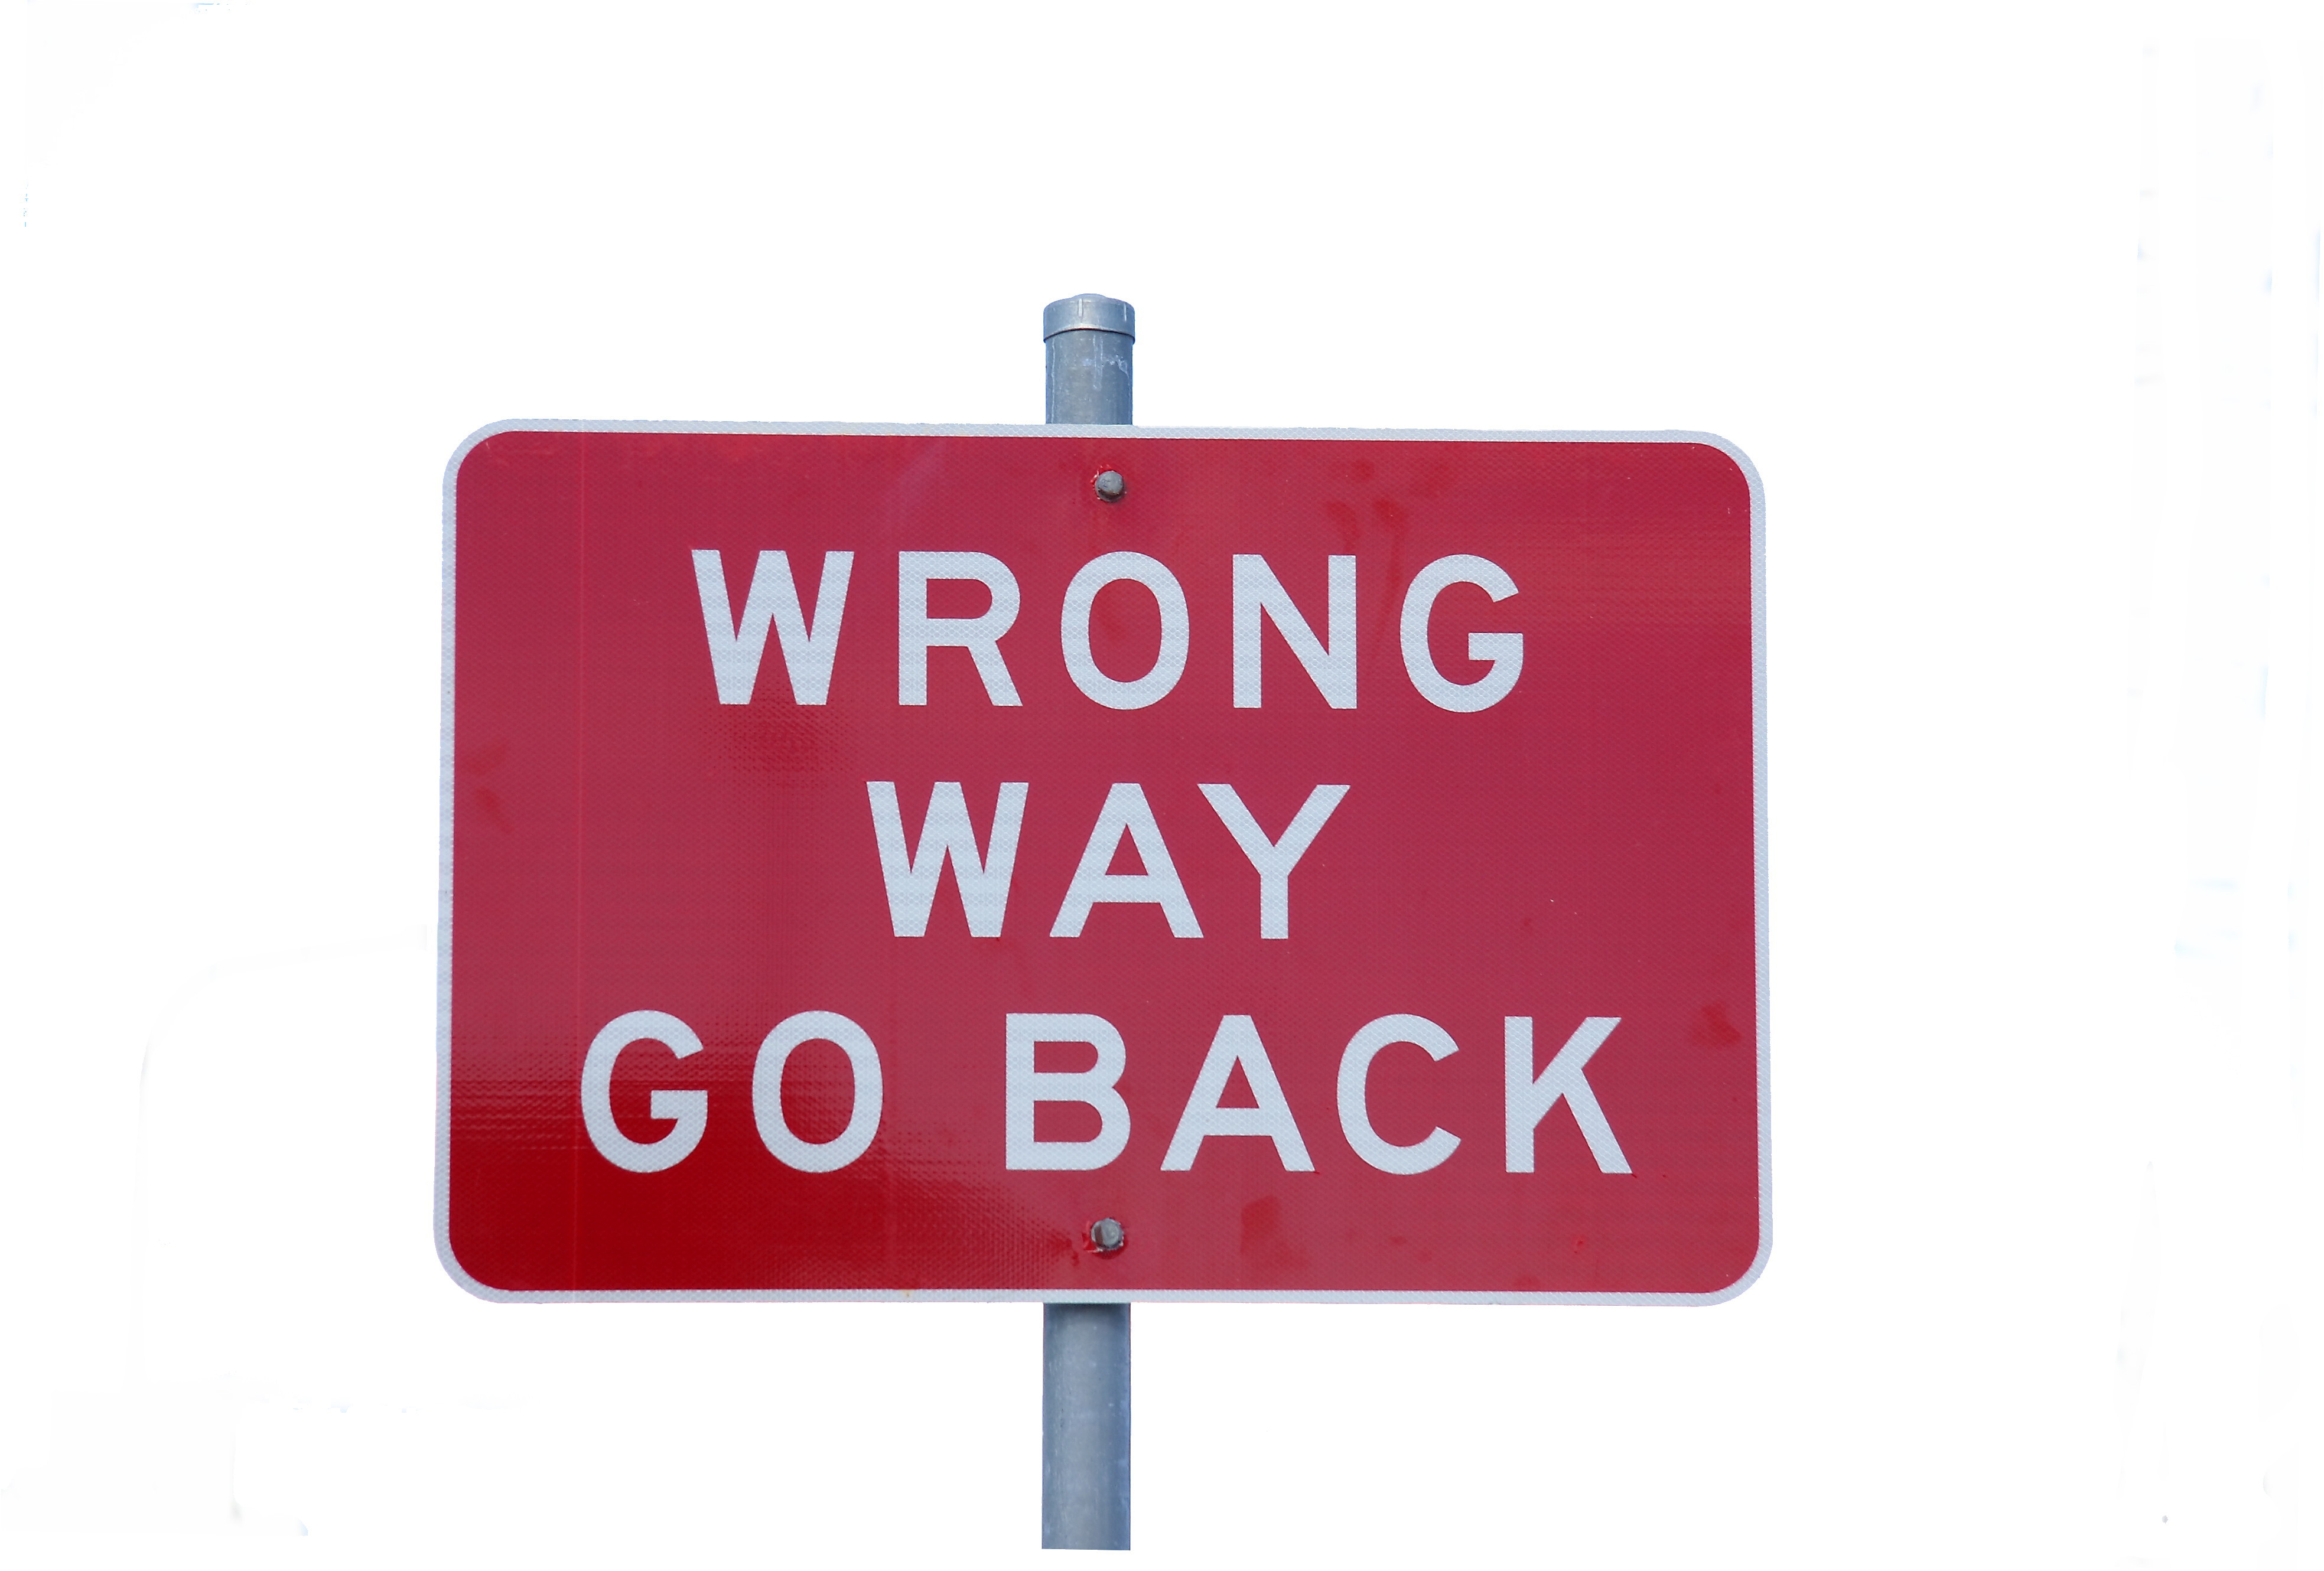 Street sign reading "Wrong Way Go Back".